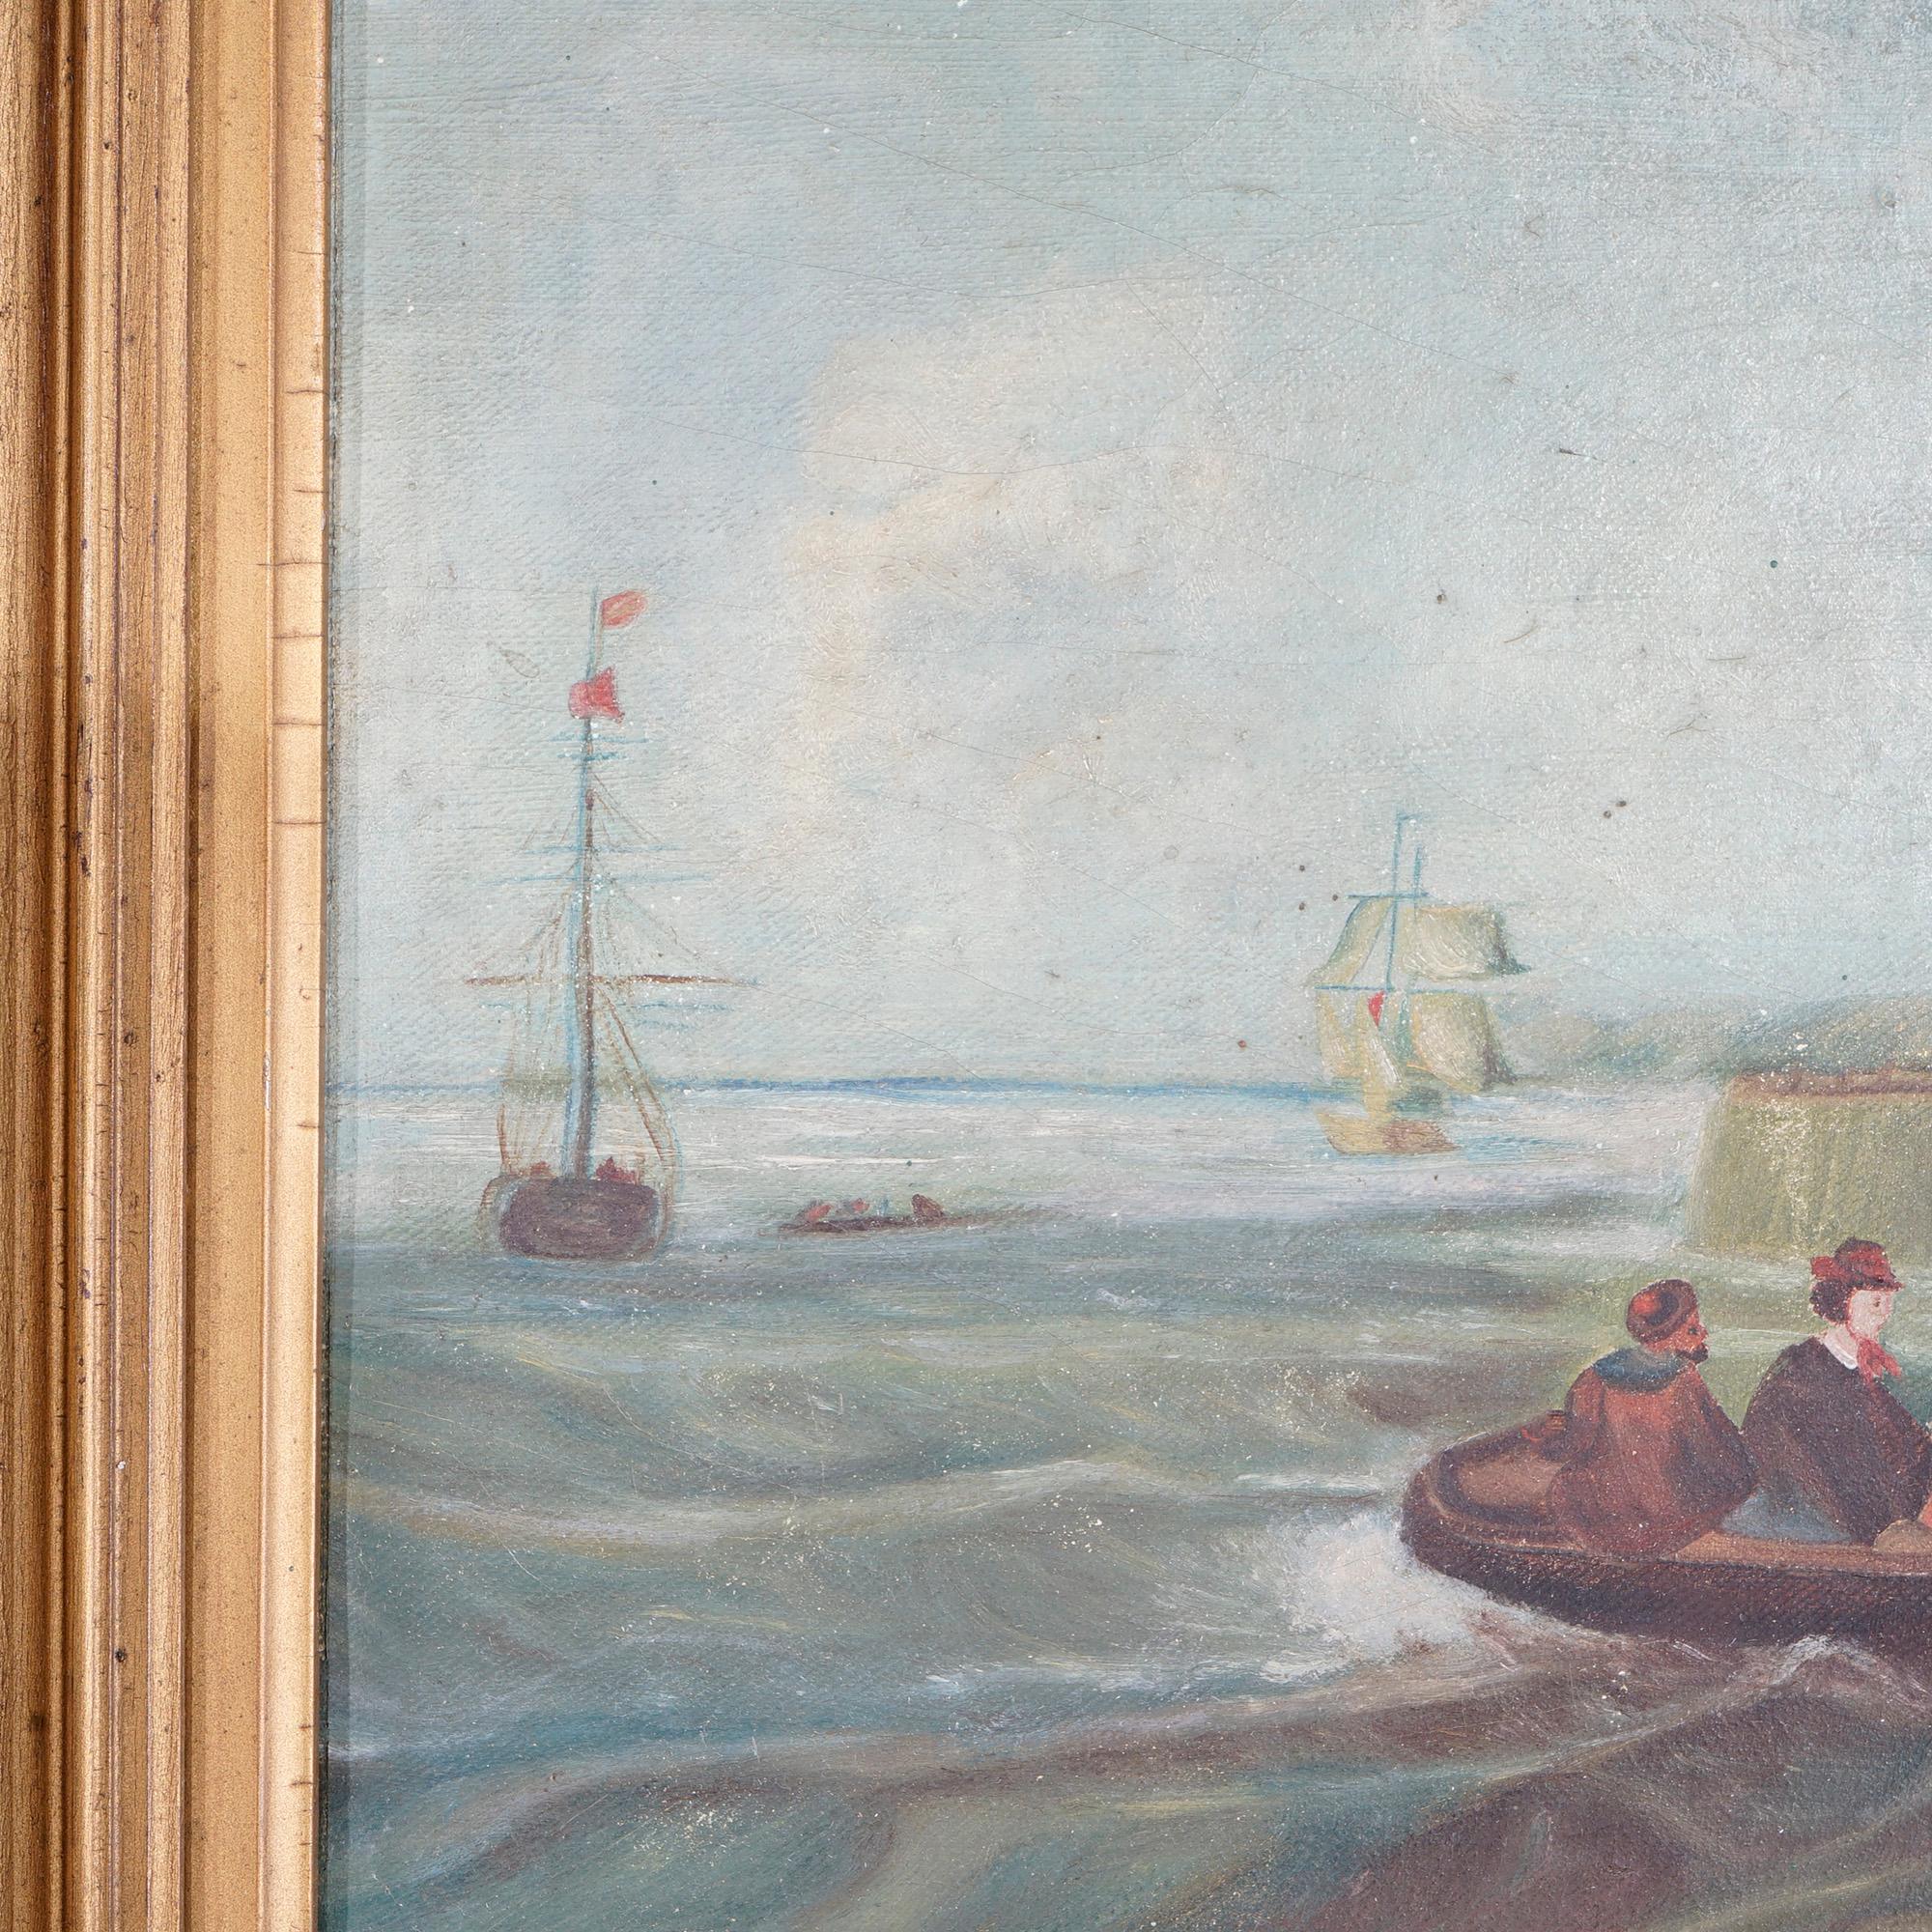 19th Century Antique Painting, Harbor Scene with Boats, Figures & Lighthouse, 19th C